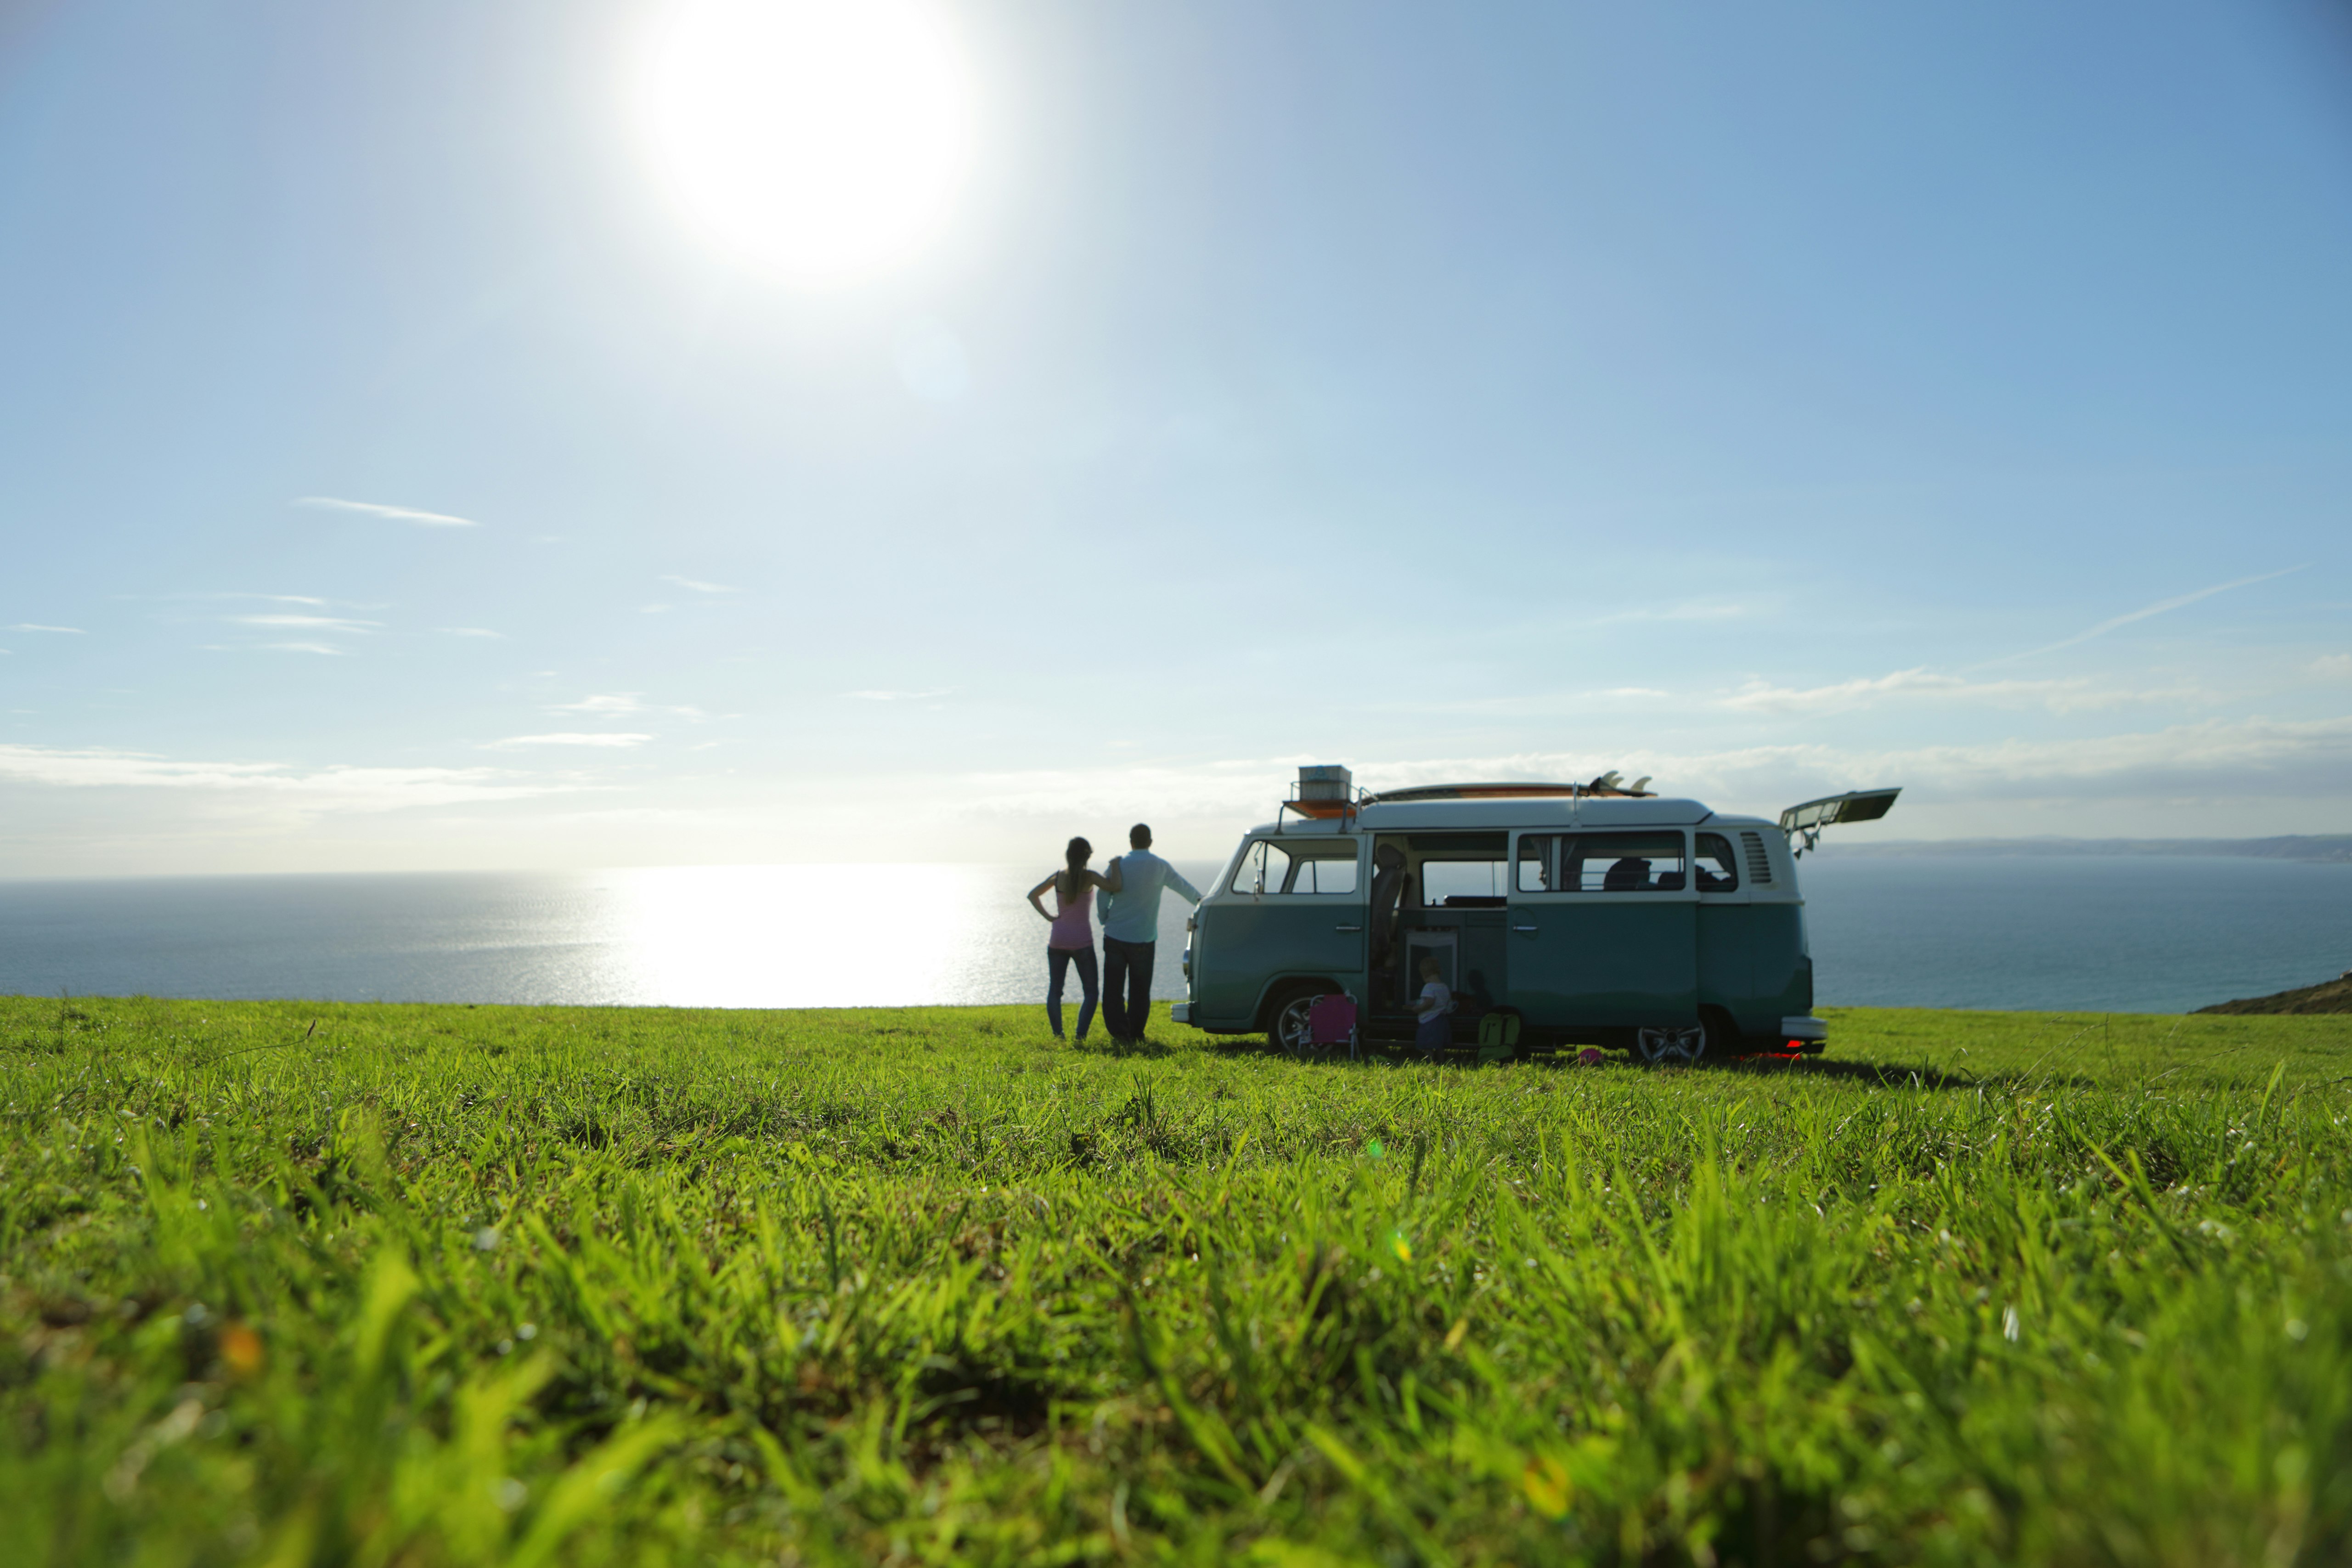 Two people stand next to a classic VW camper van parked in the middle of a grassy field. The sea is visible in the distance.